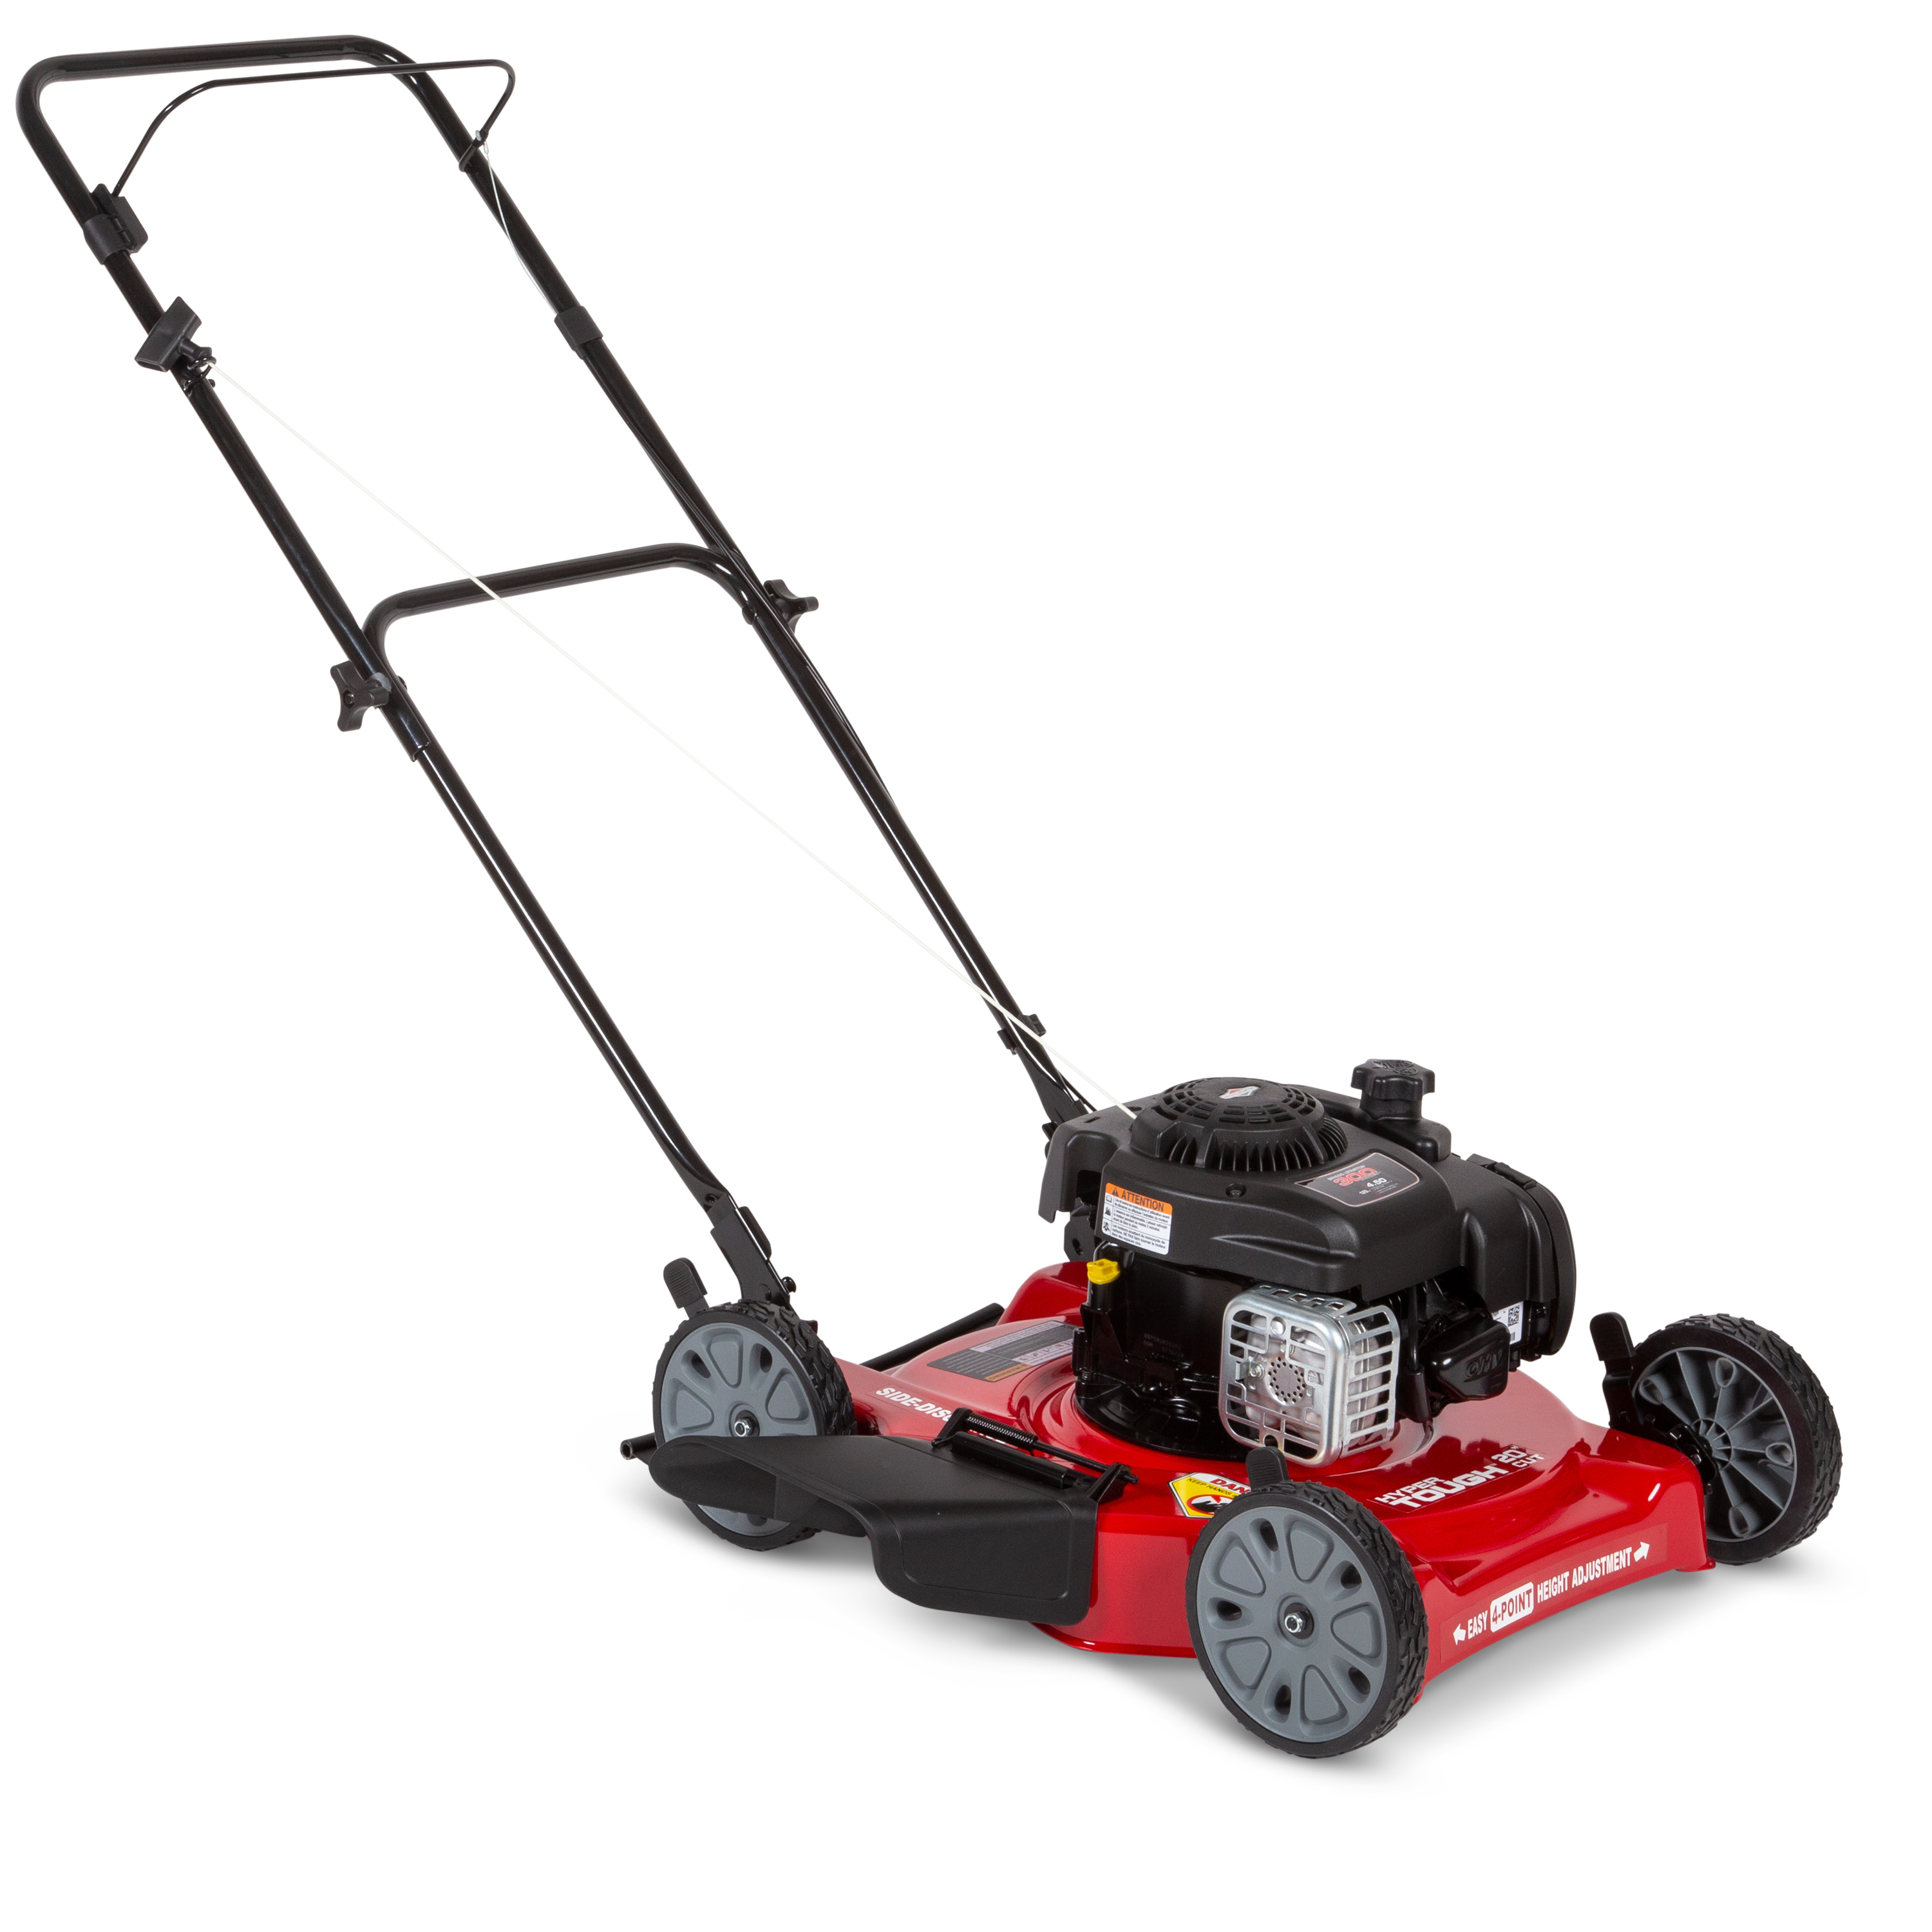 best-gas-lawn-mower-under-100-reviews-buying-guide-tractorshouse